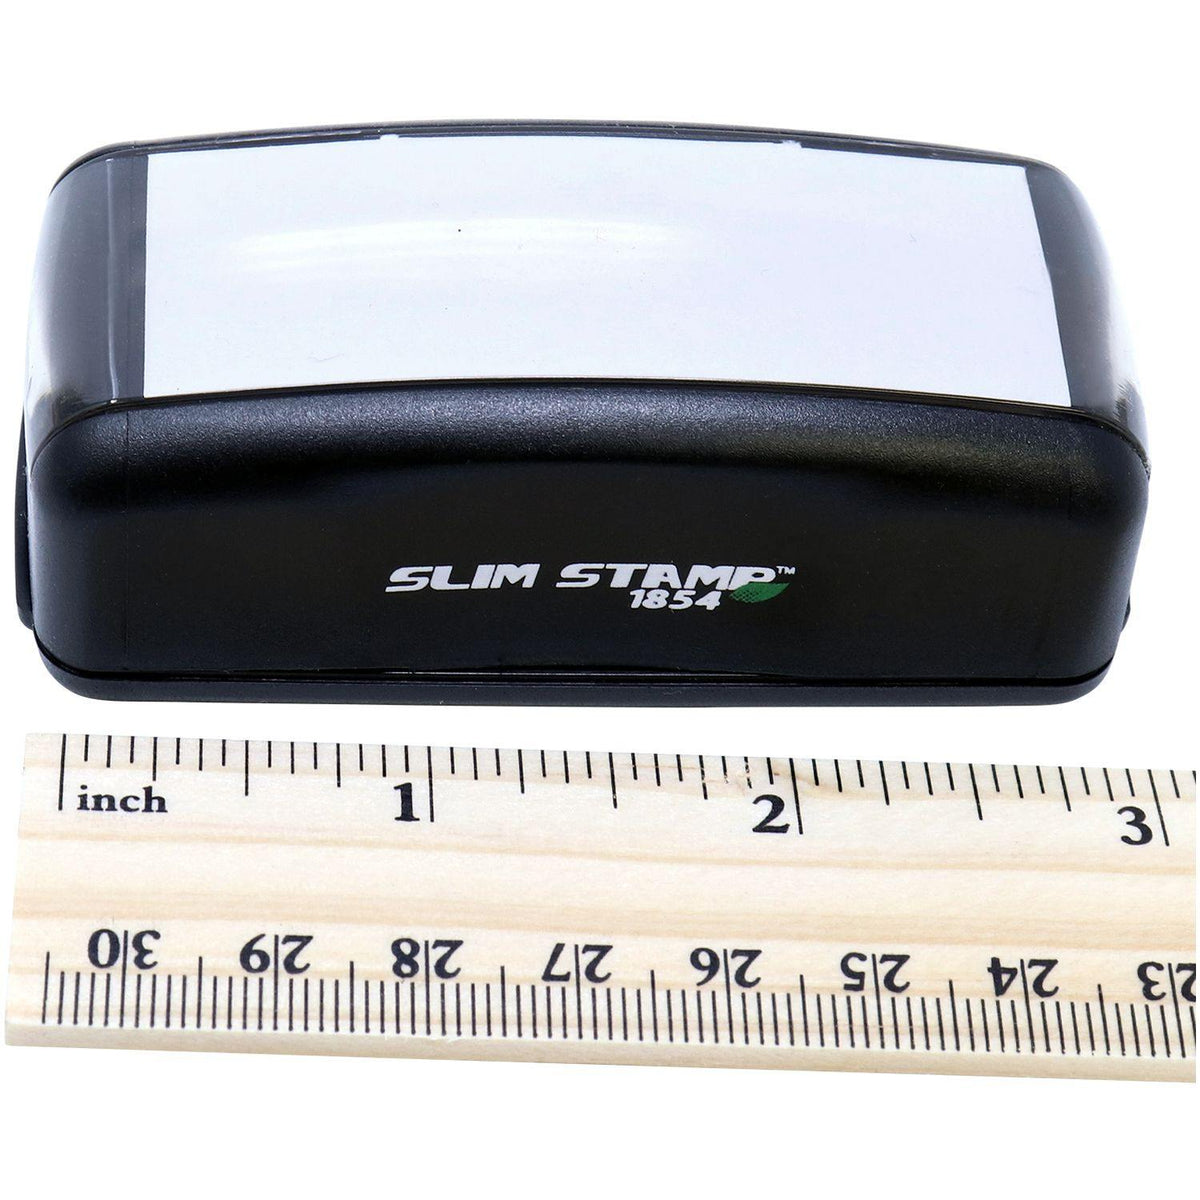 Measurement Large Pre-Inked Received Without Contents Stamp with Ruler